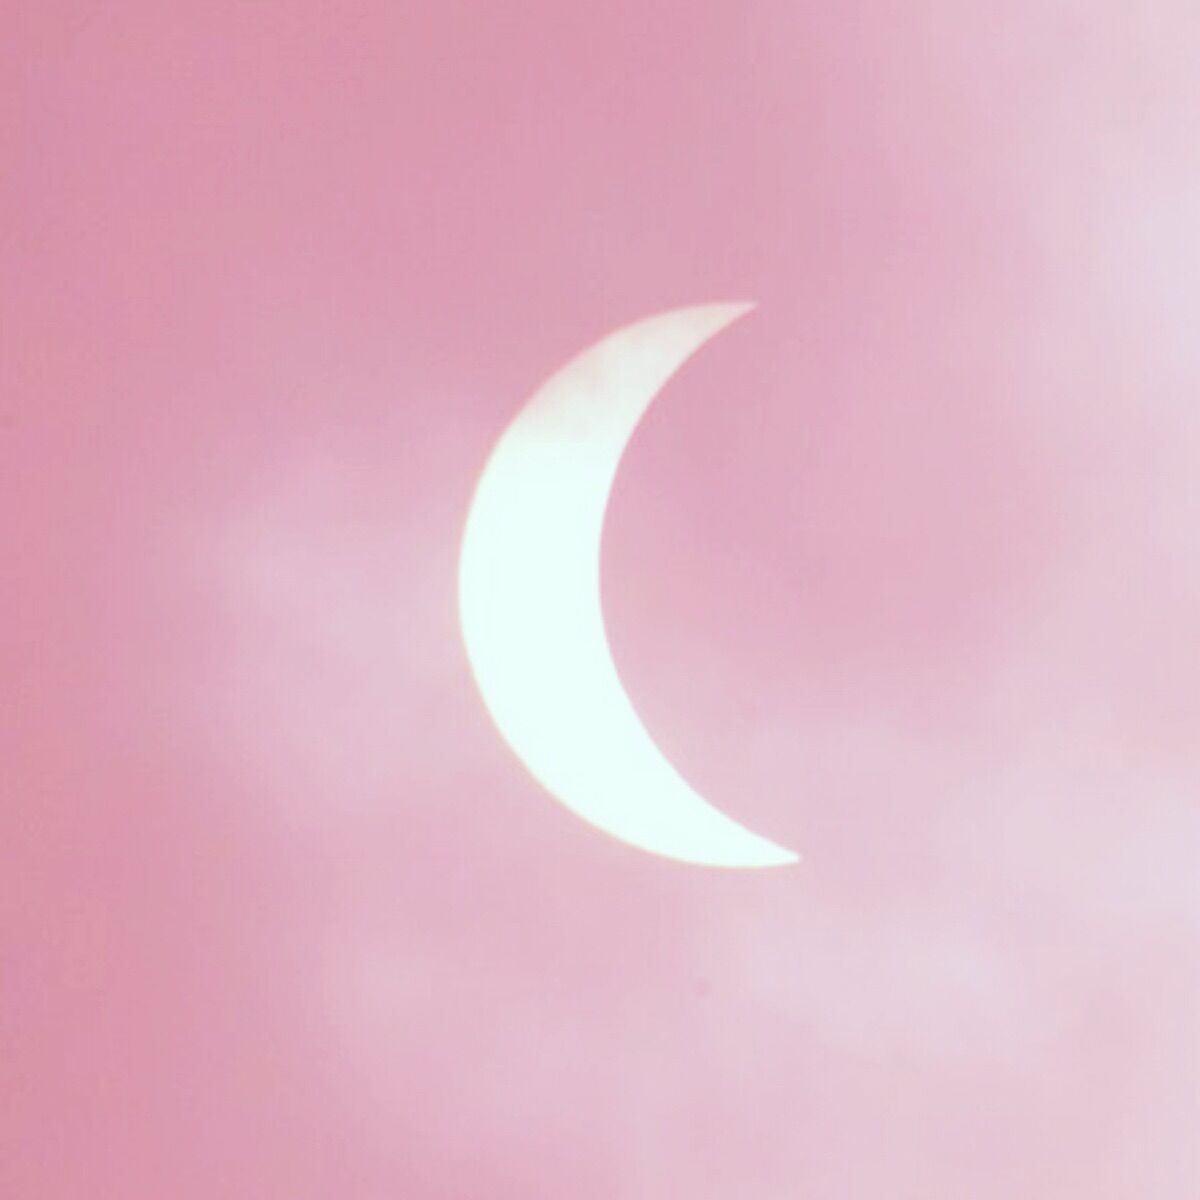 Female, Tumblr Wallpapers, Aesthetic - Pink Moon Aesthetic , HD Wallpaper & Backgrounds